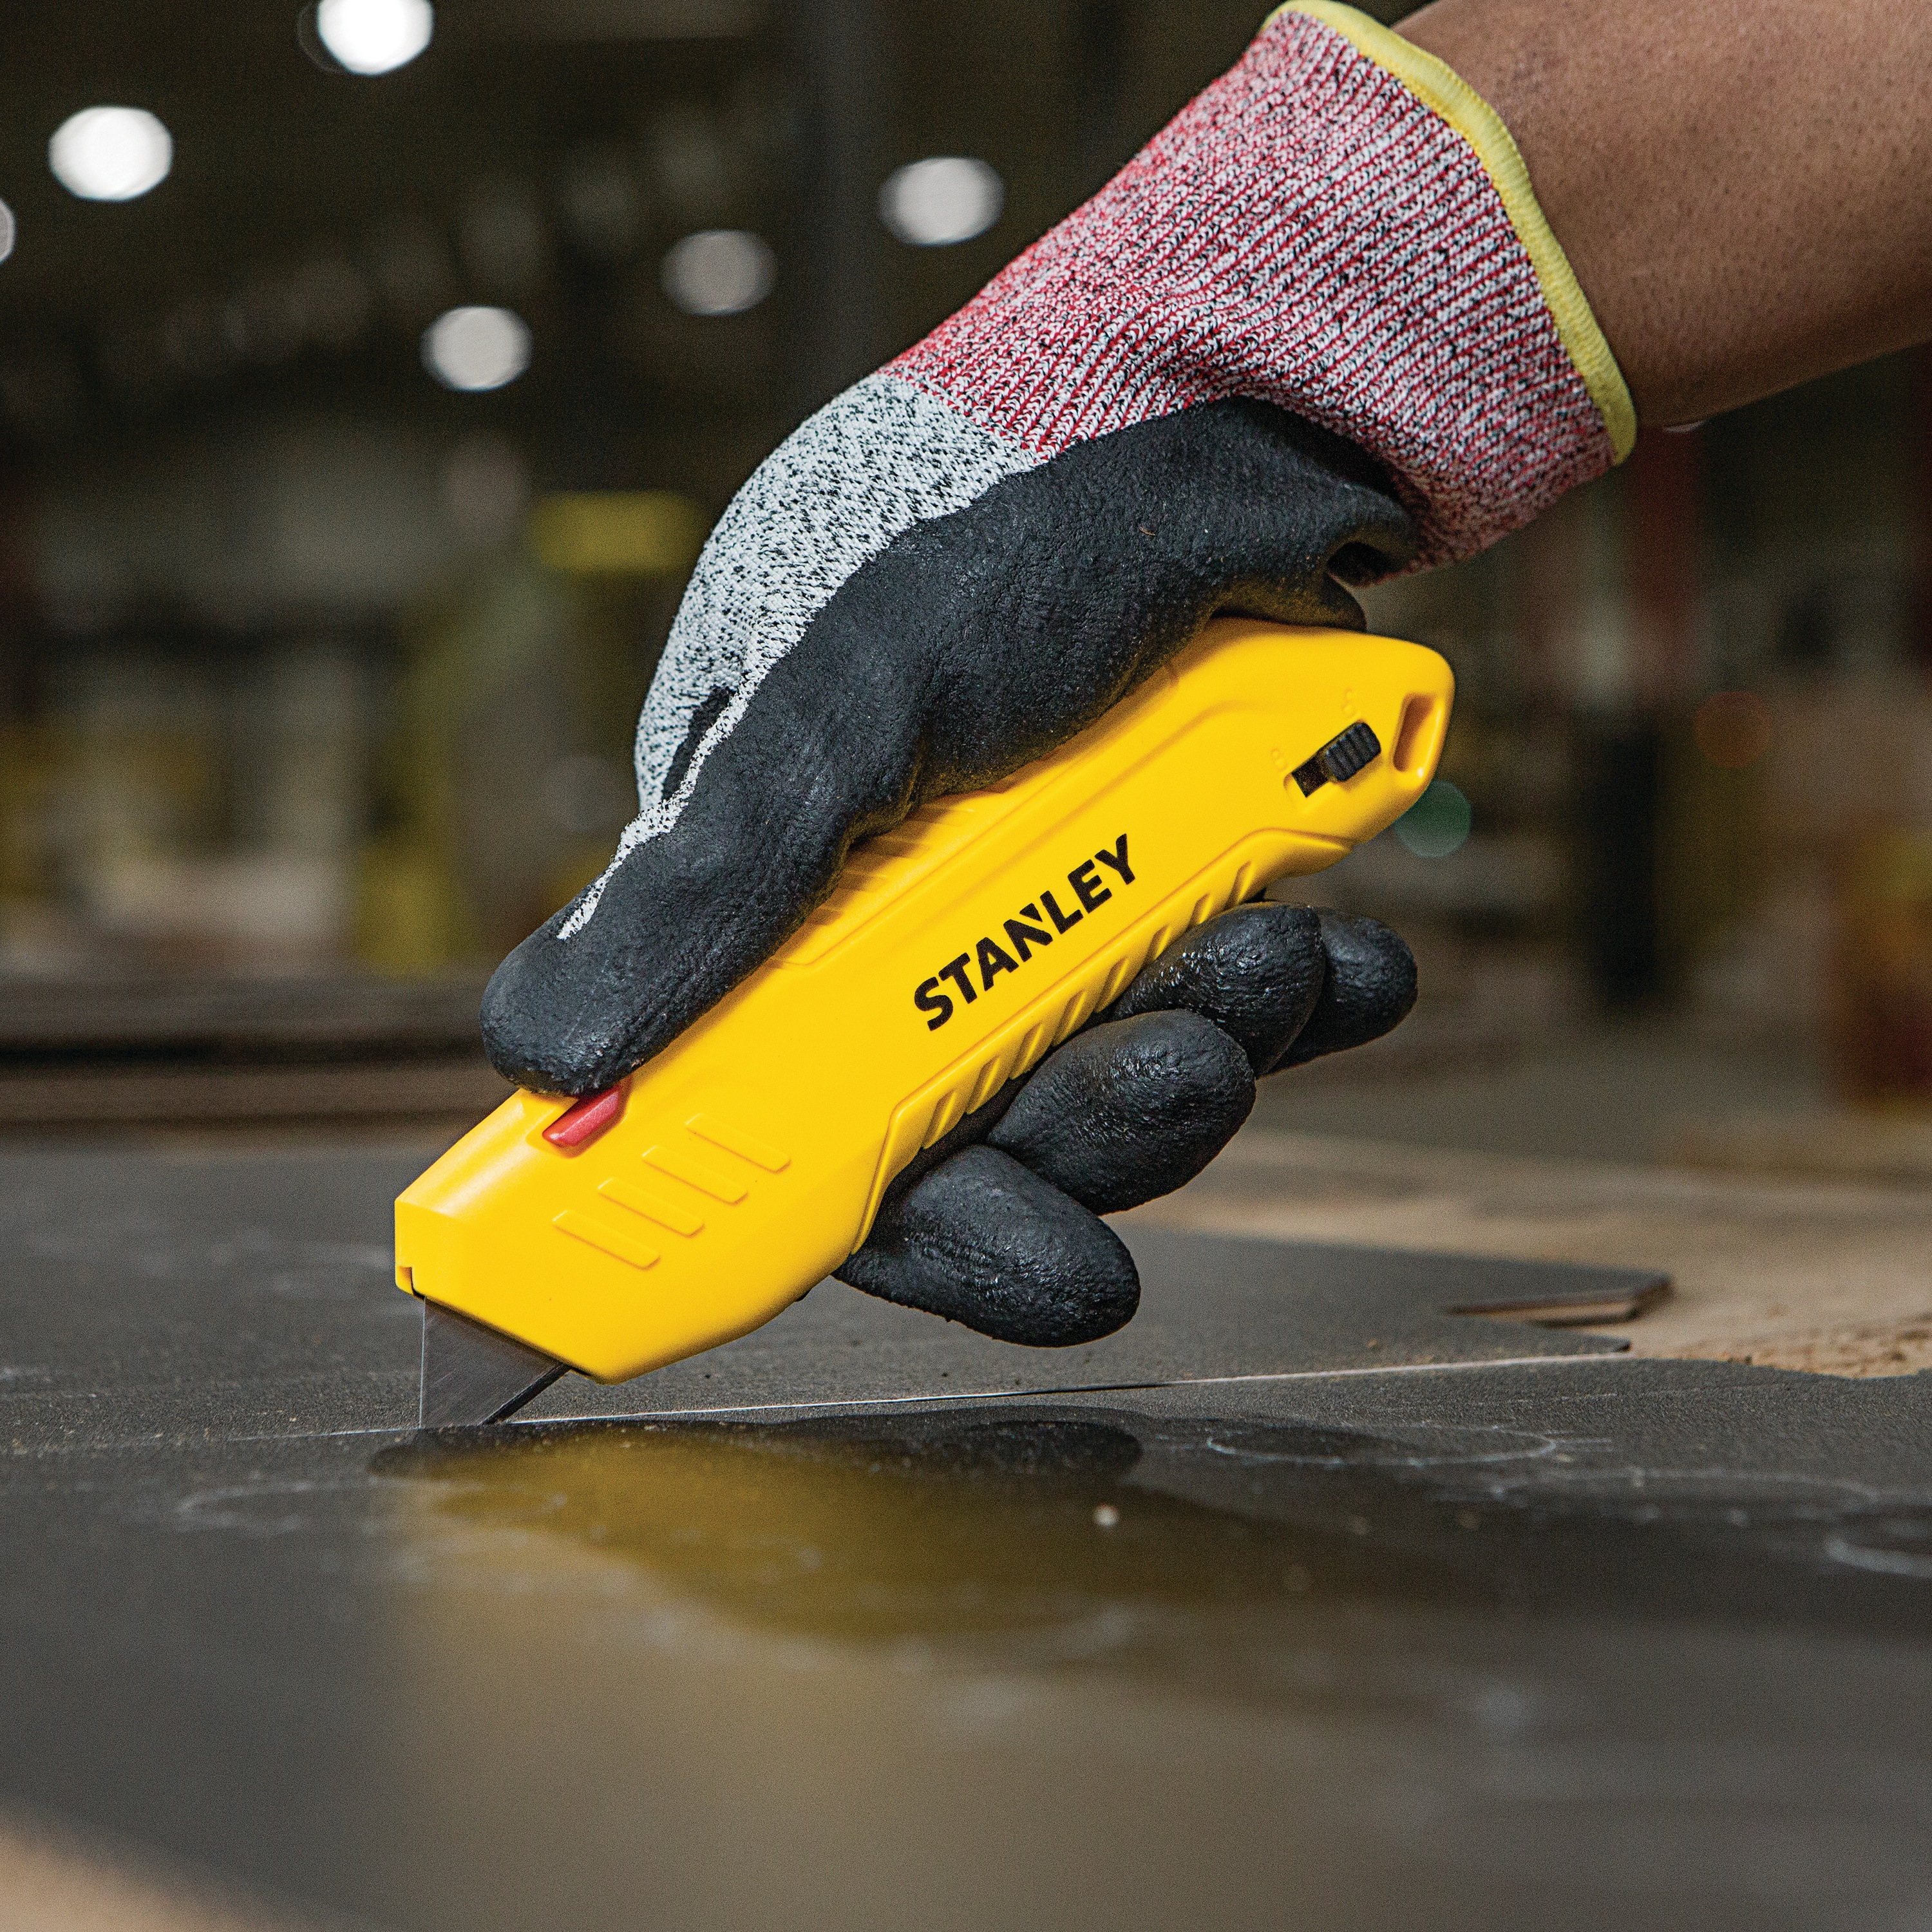 Stanley Tools - Squeeze Safety Knife - STHT10368